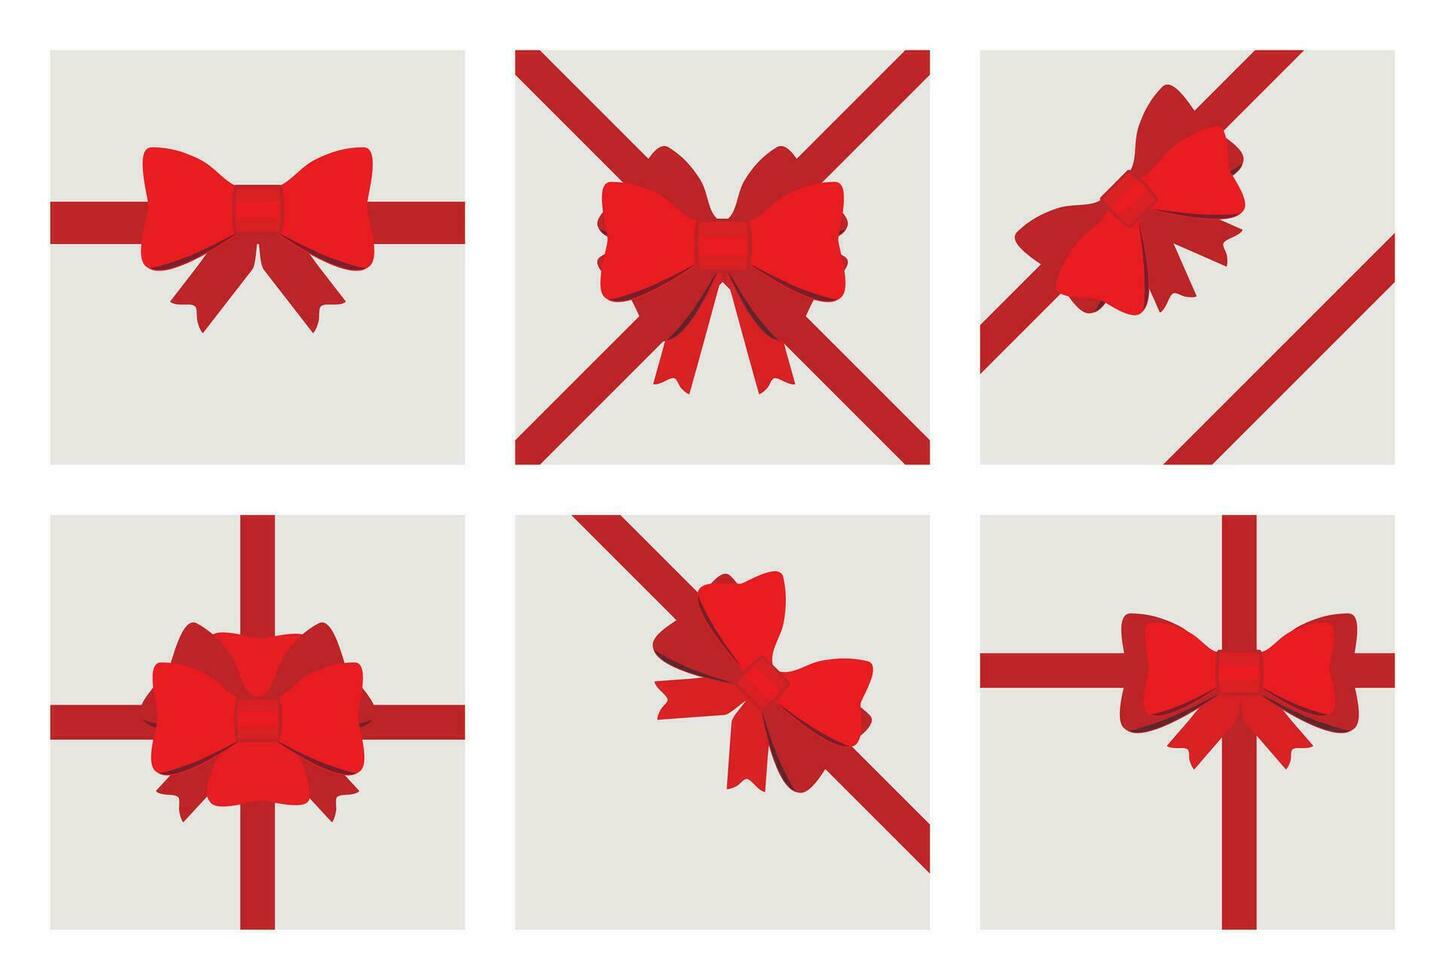 Set of red gift bows with ribbons for decorating gifts, surprises for holidays. Wide gift bow vector